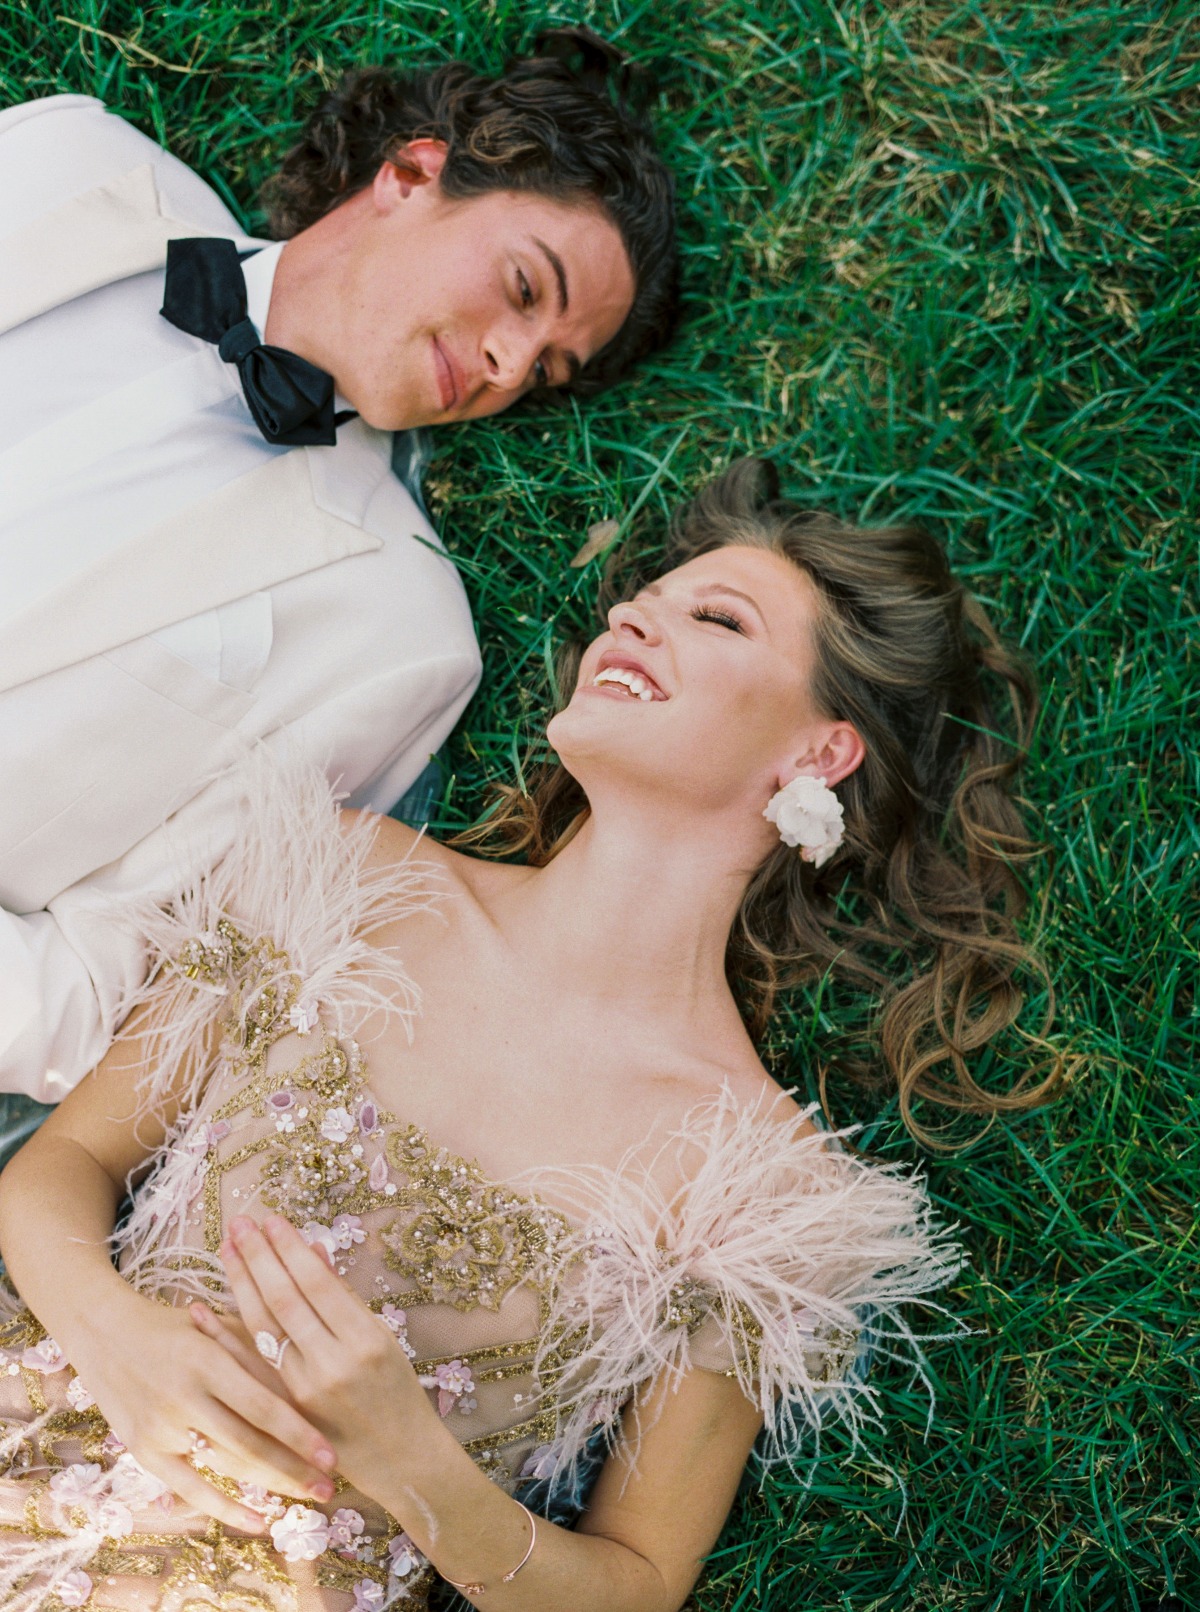 Luxury Spring Wedding Inspiration With Marchesa Fashions at the Dover Hall Estate In Virginia